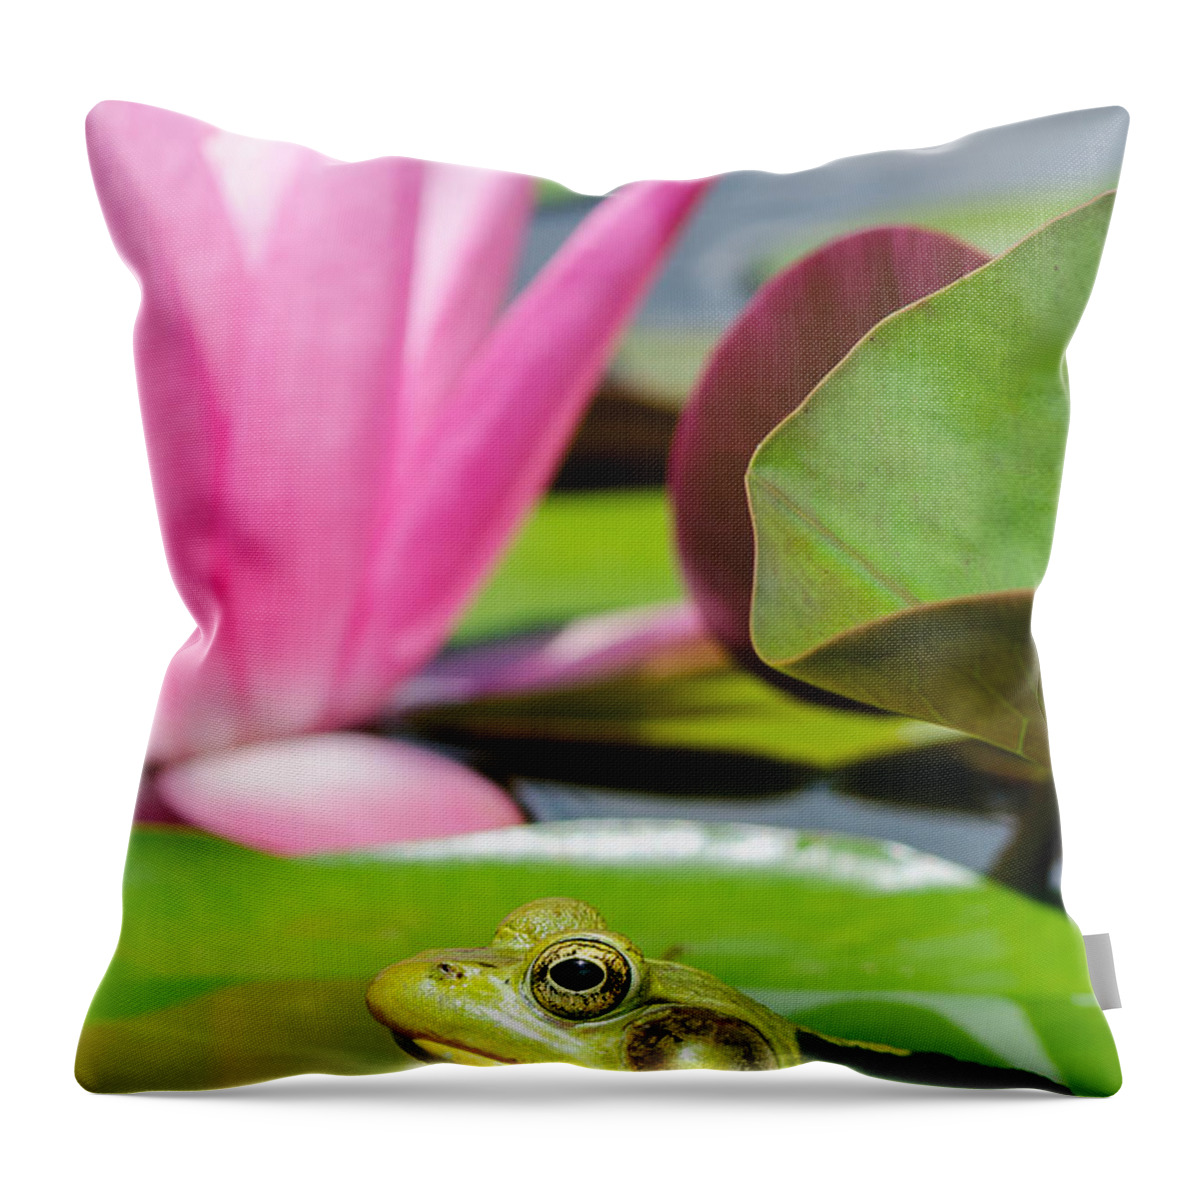 Ladew Gardens Throw Pillow featuring the photograph Ladew Flog by Georgette Grossman